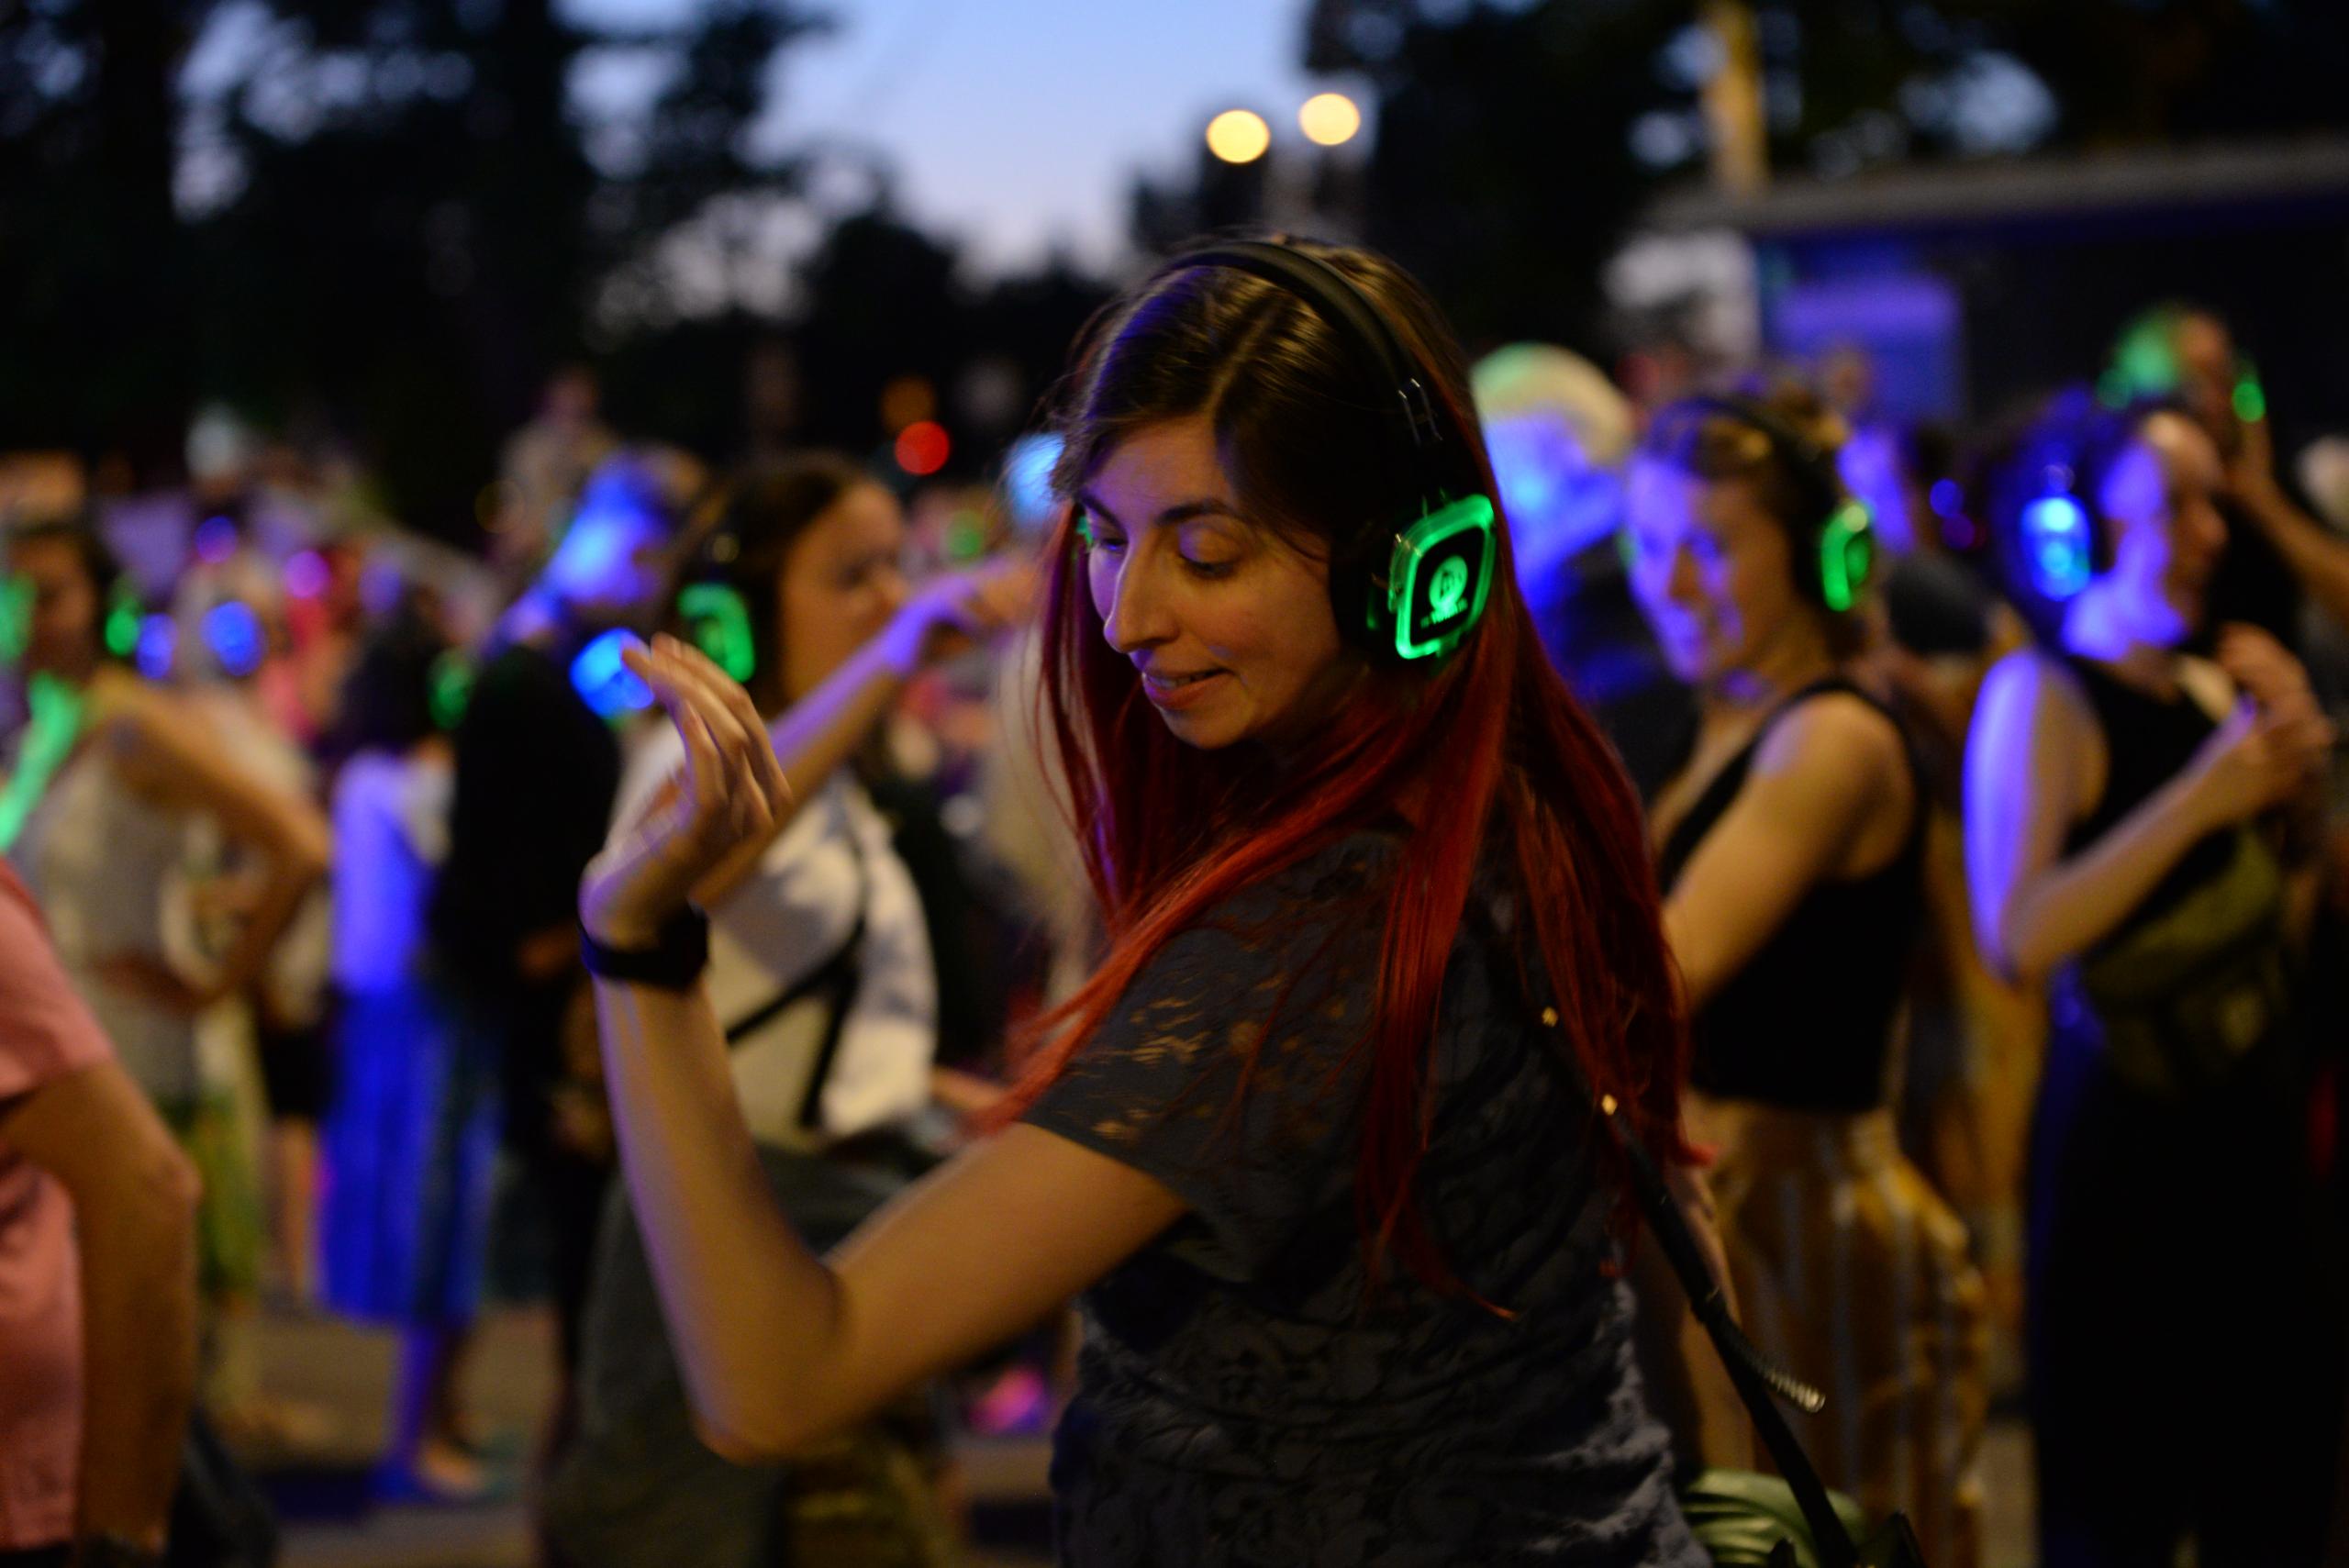 A young woman dances her own rhythm with headphones